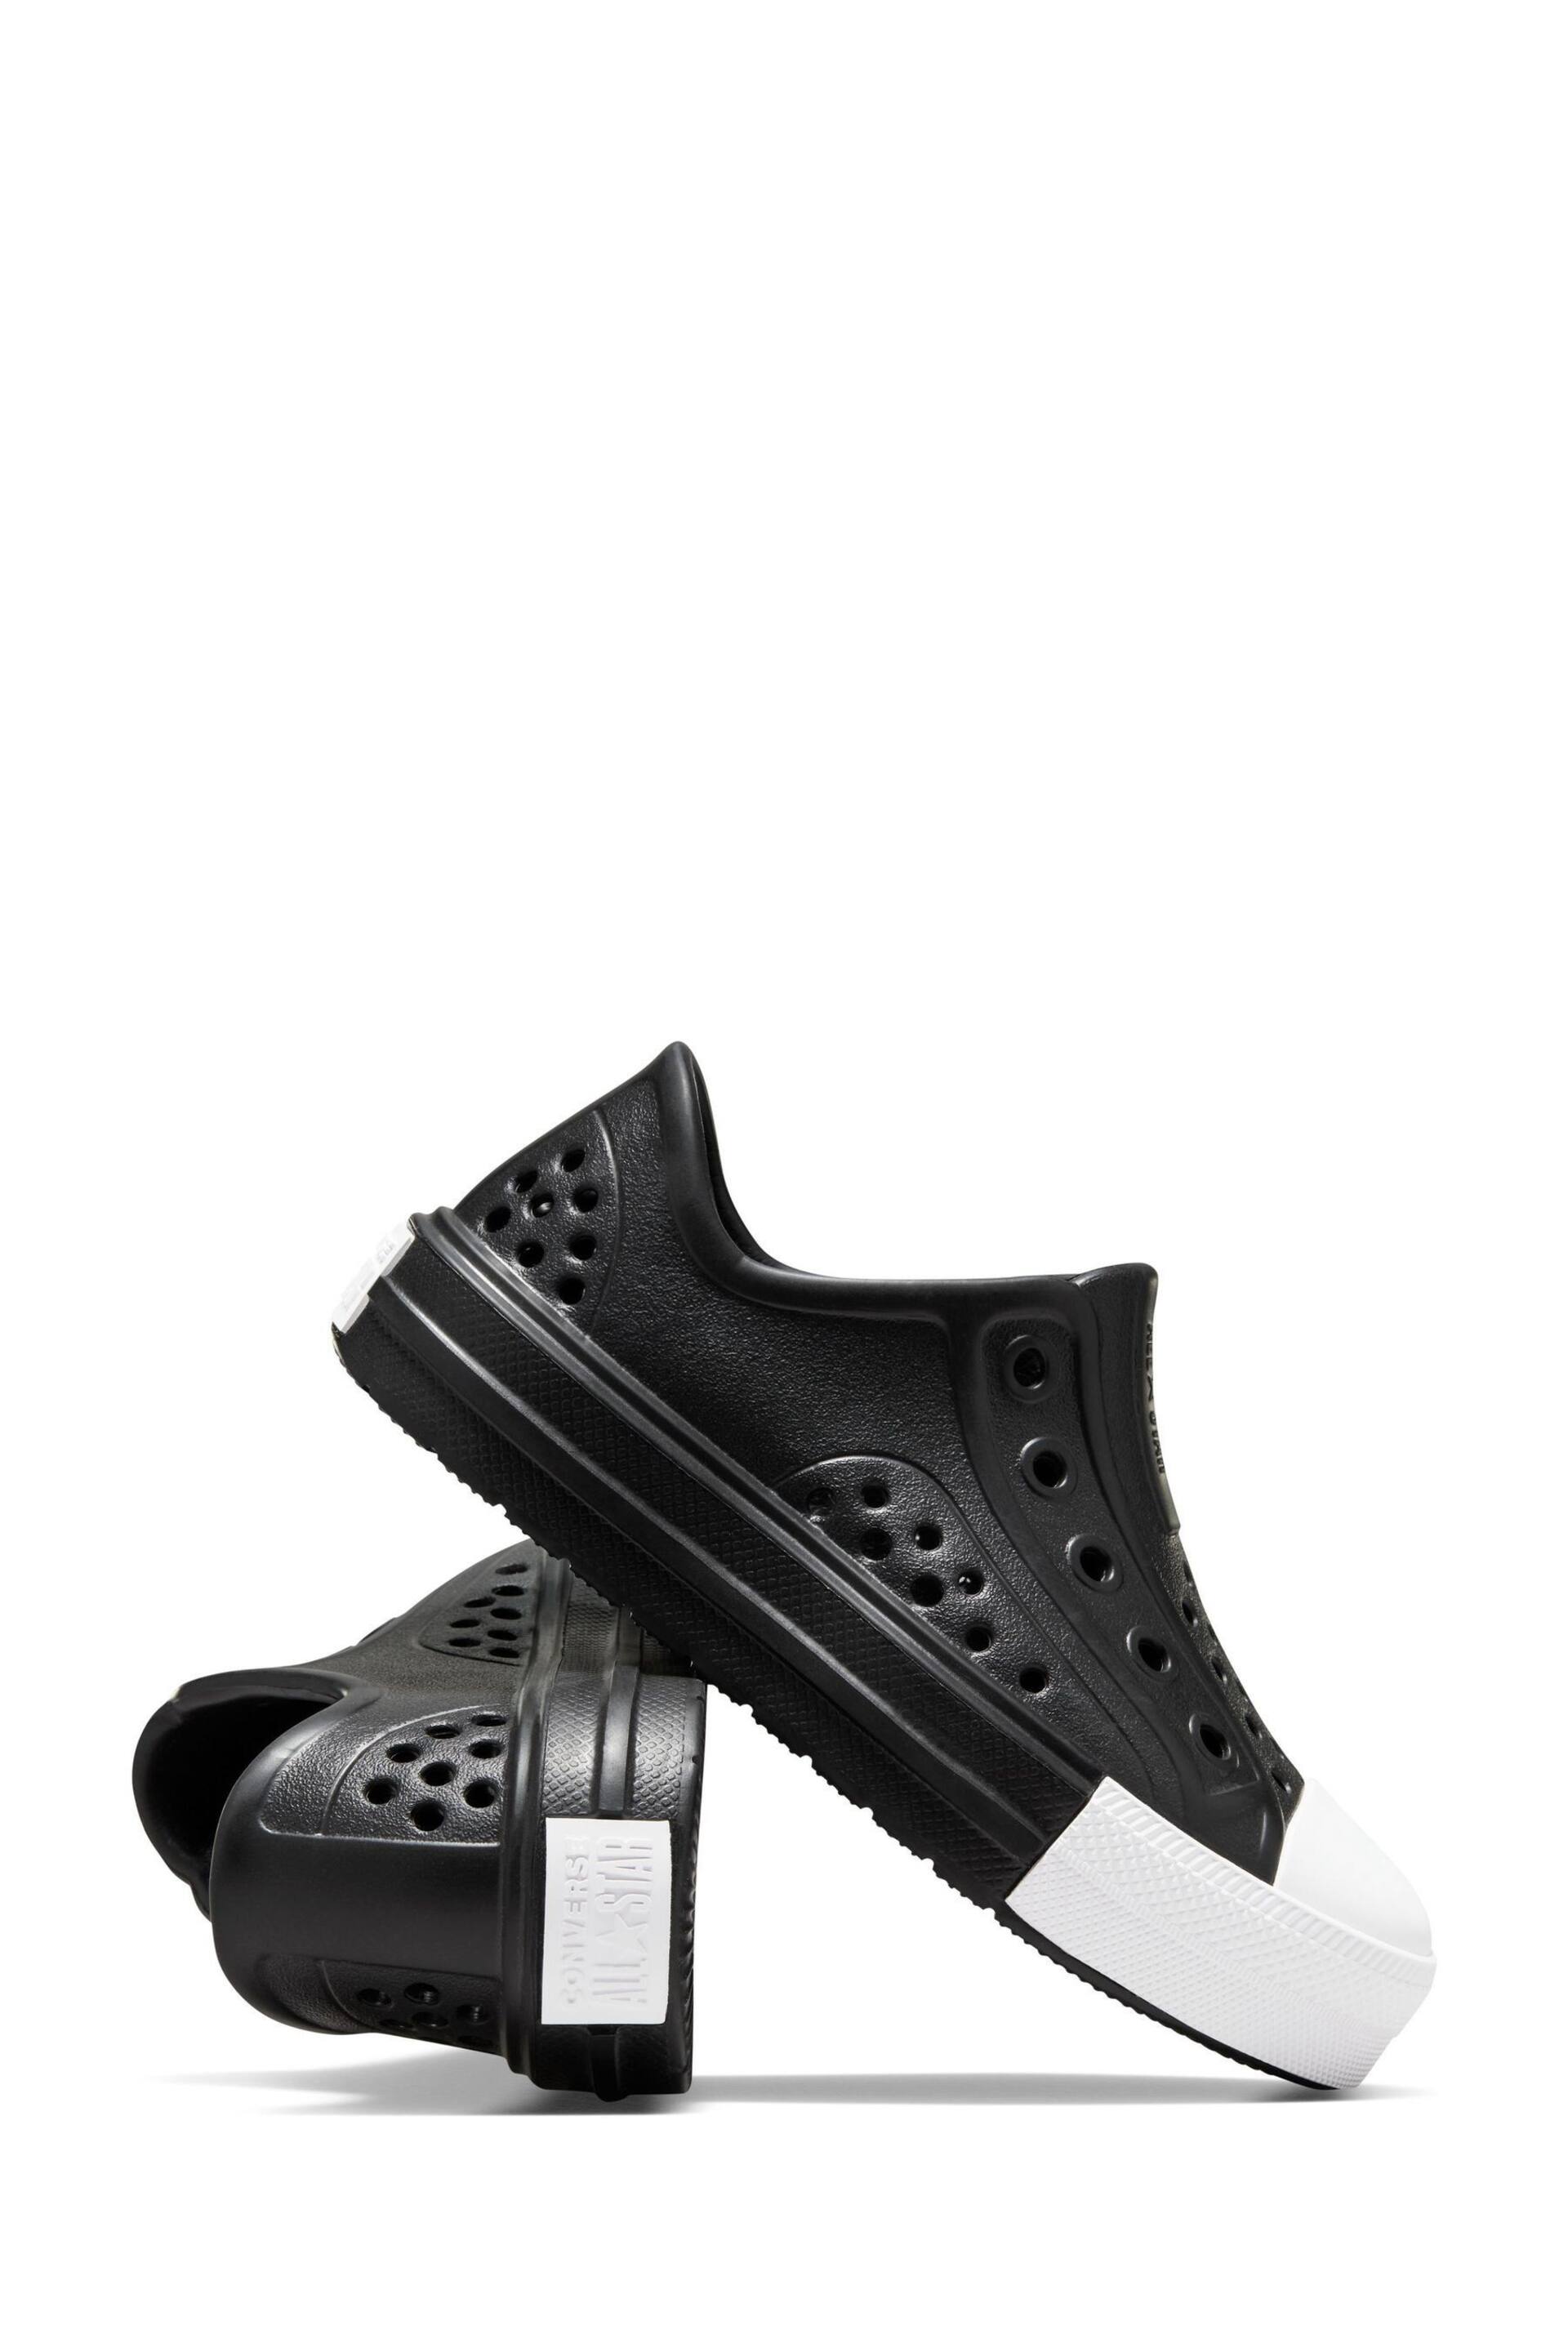 Converse Black Chuck Taylor All Star Play Lite Cx Sandals - Image 8 of 9